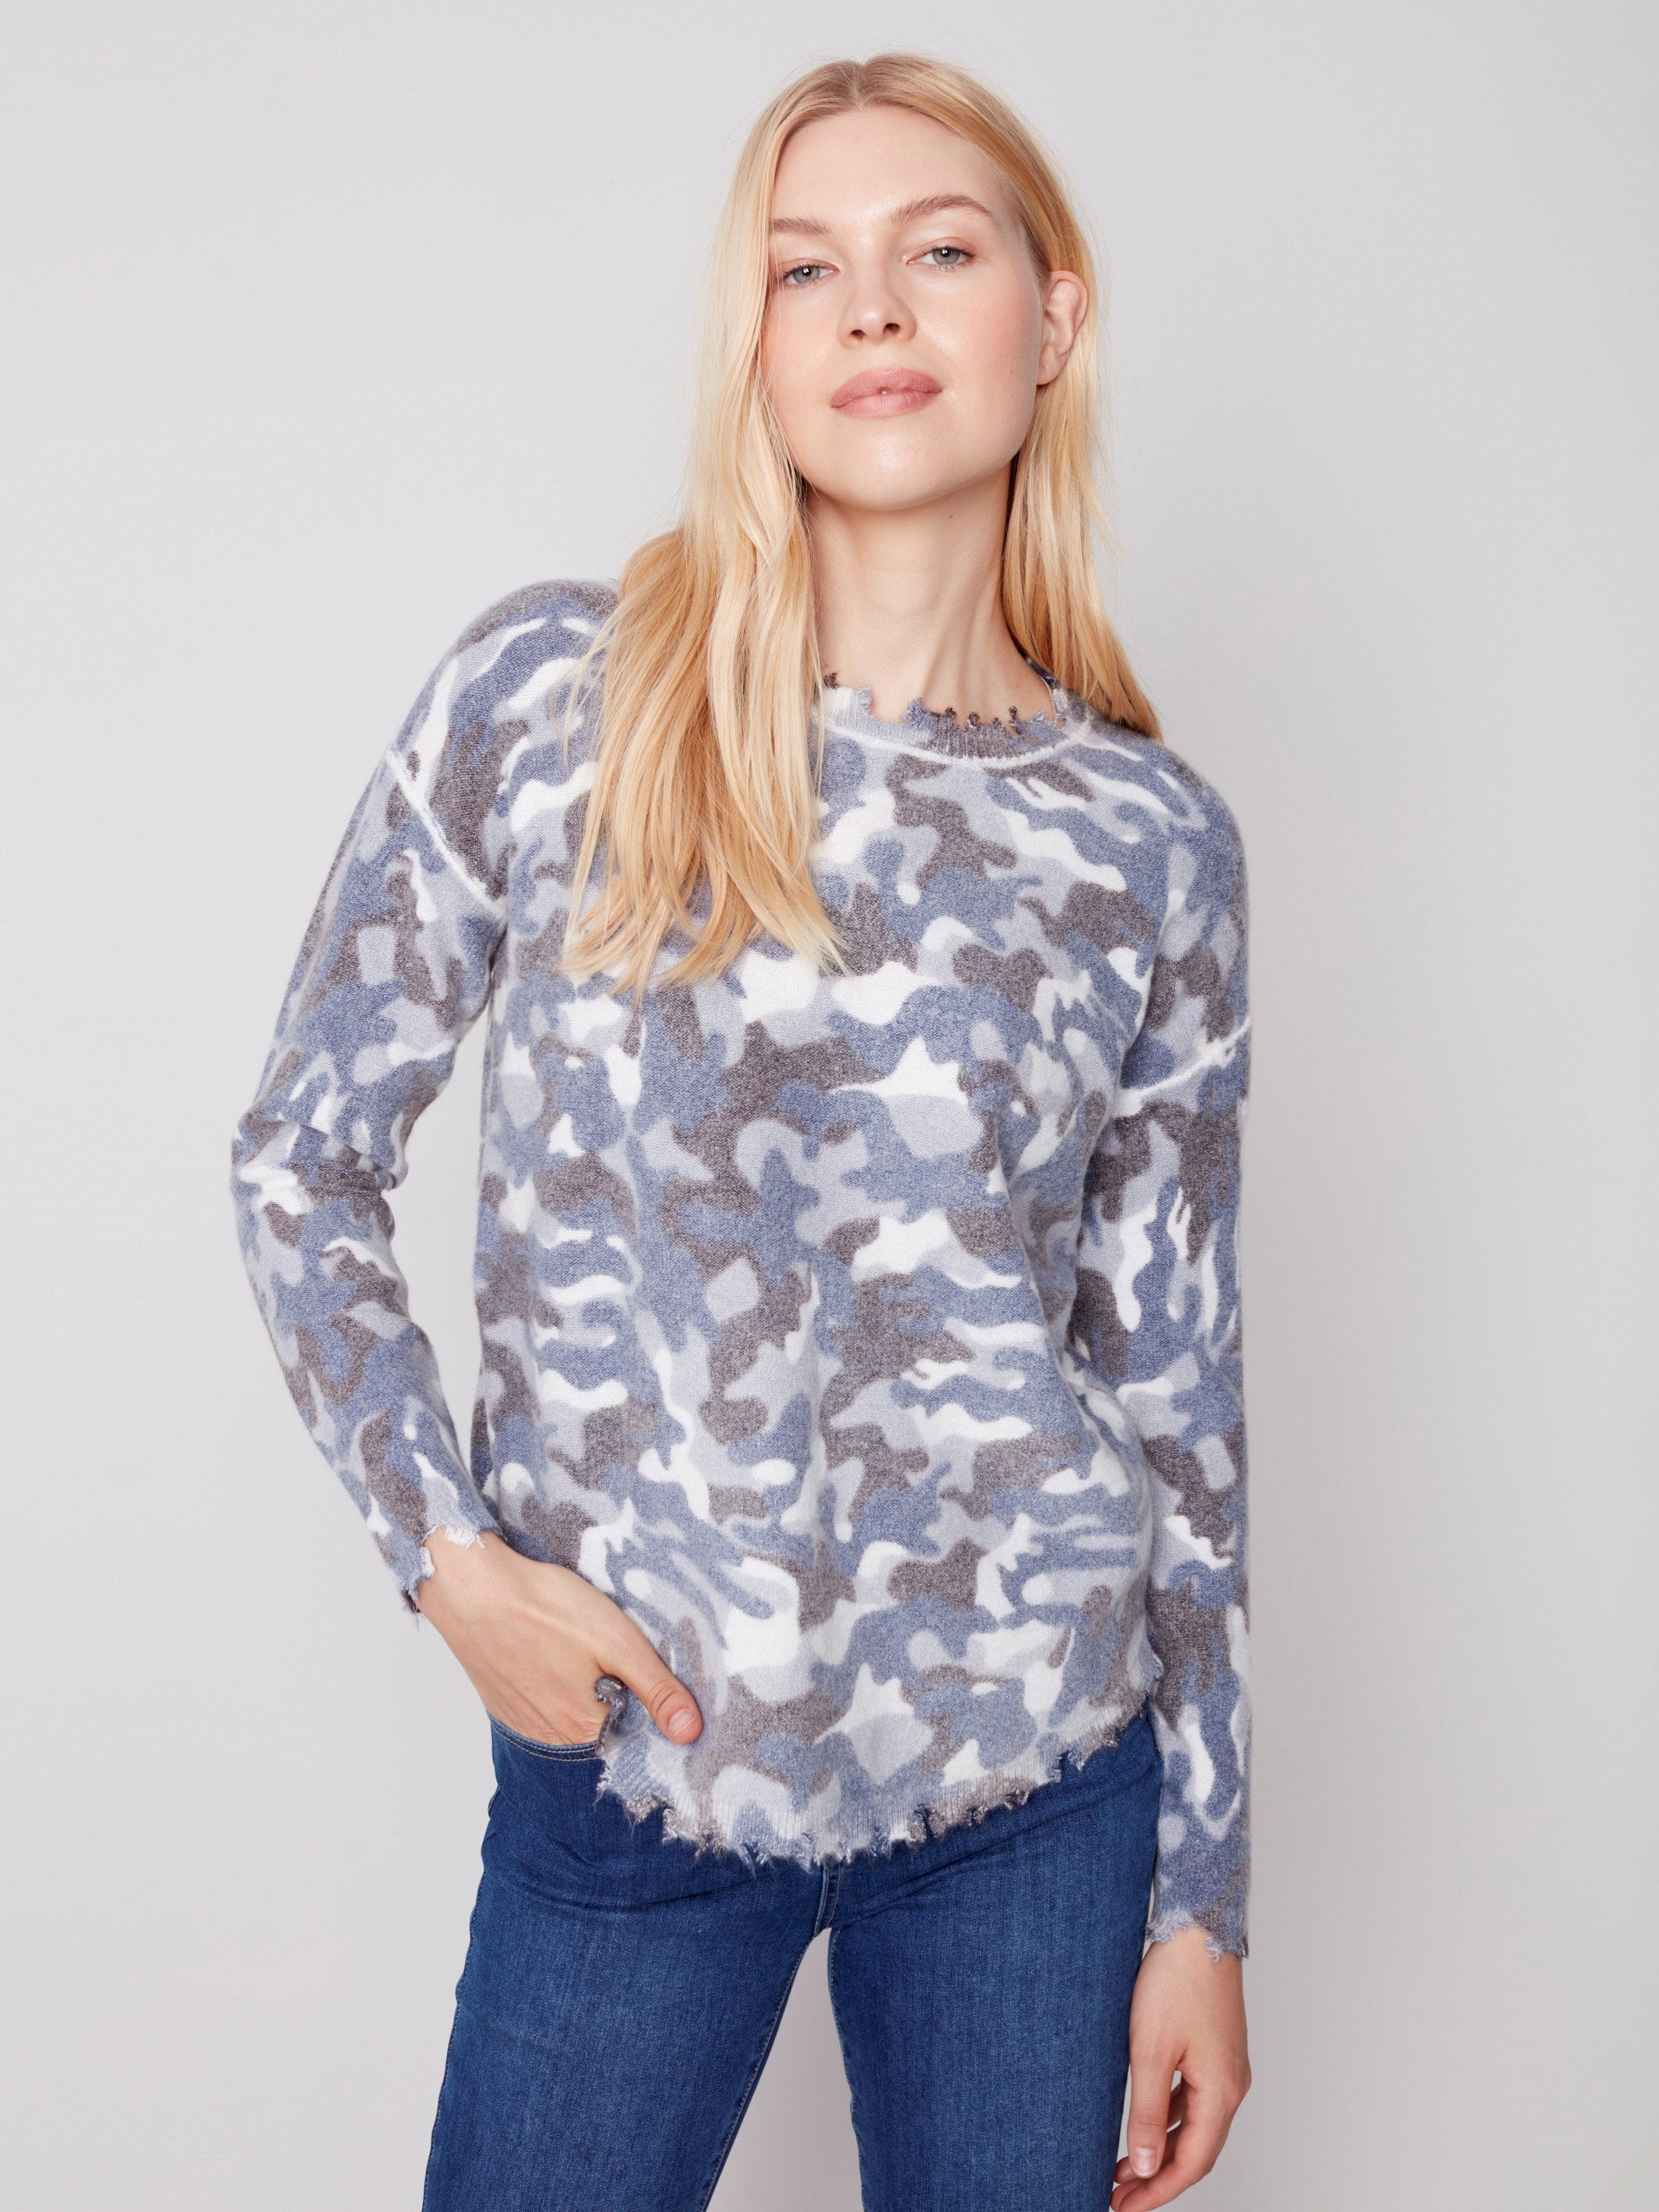 Reversible Printed Sweater with Frayed Edge - Denim